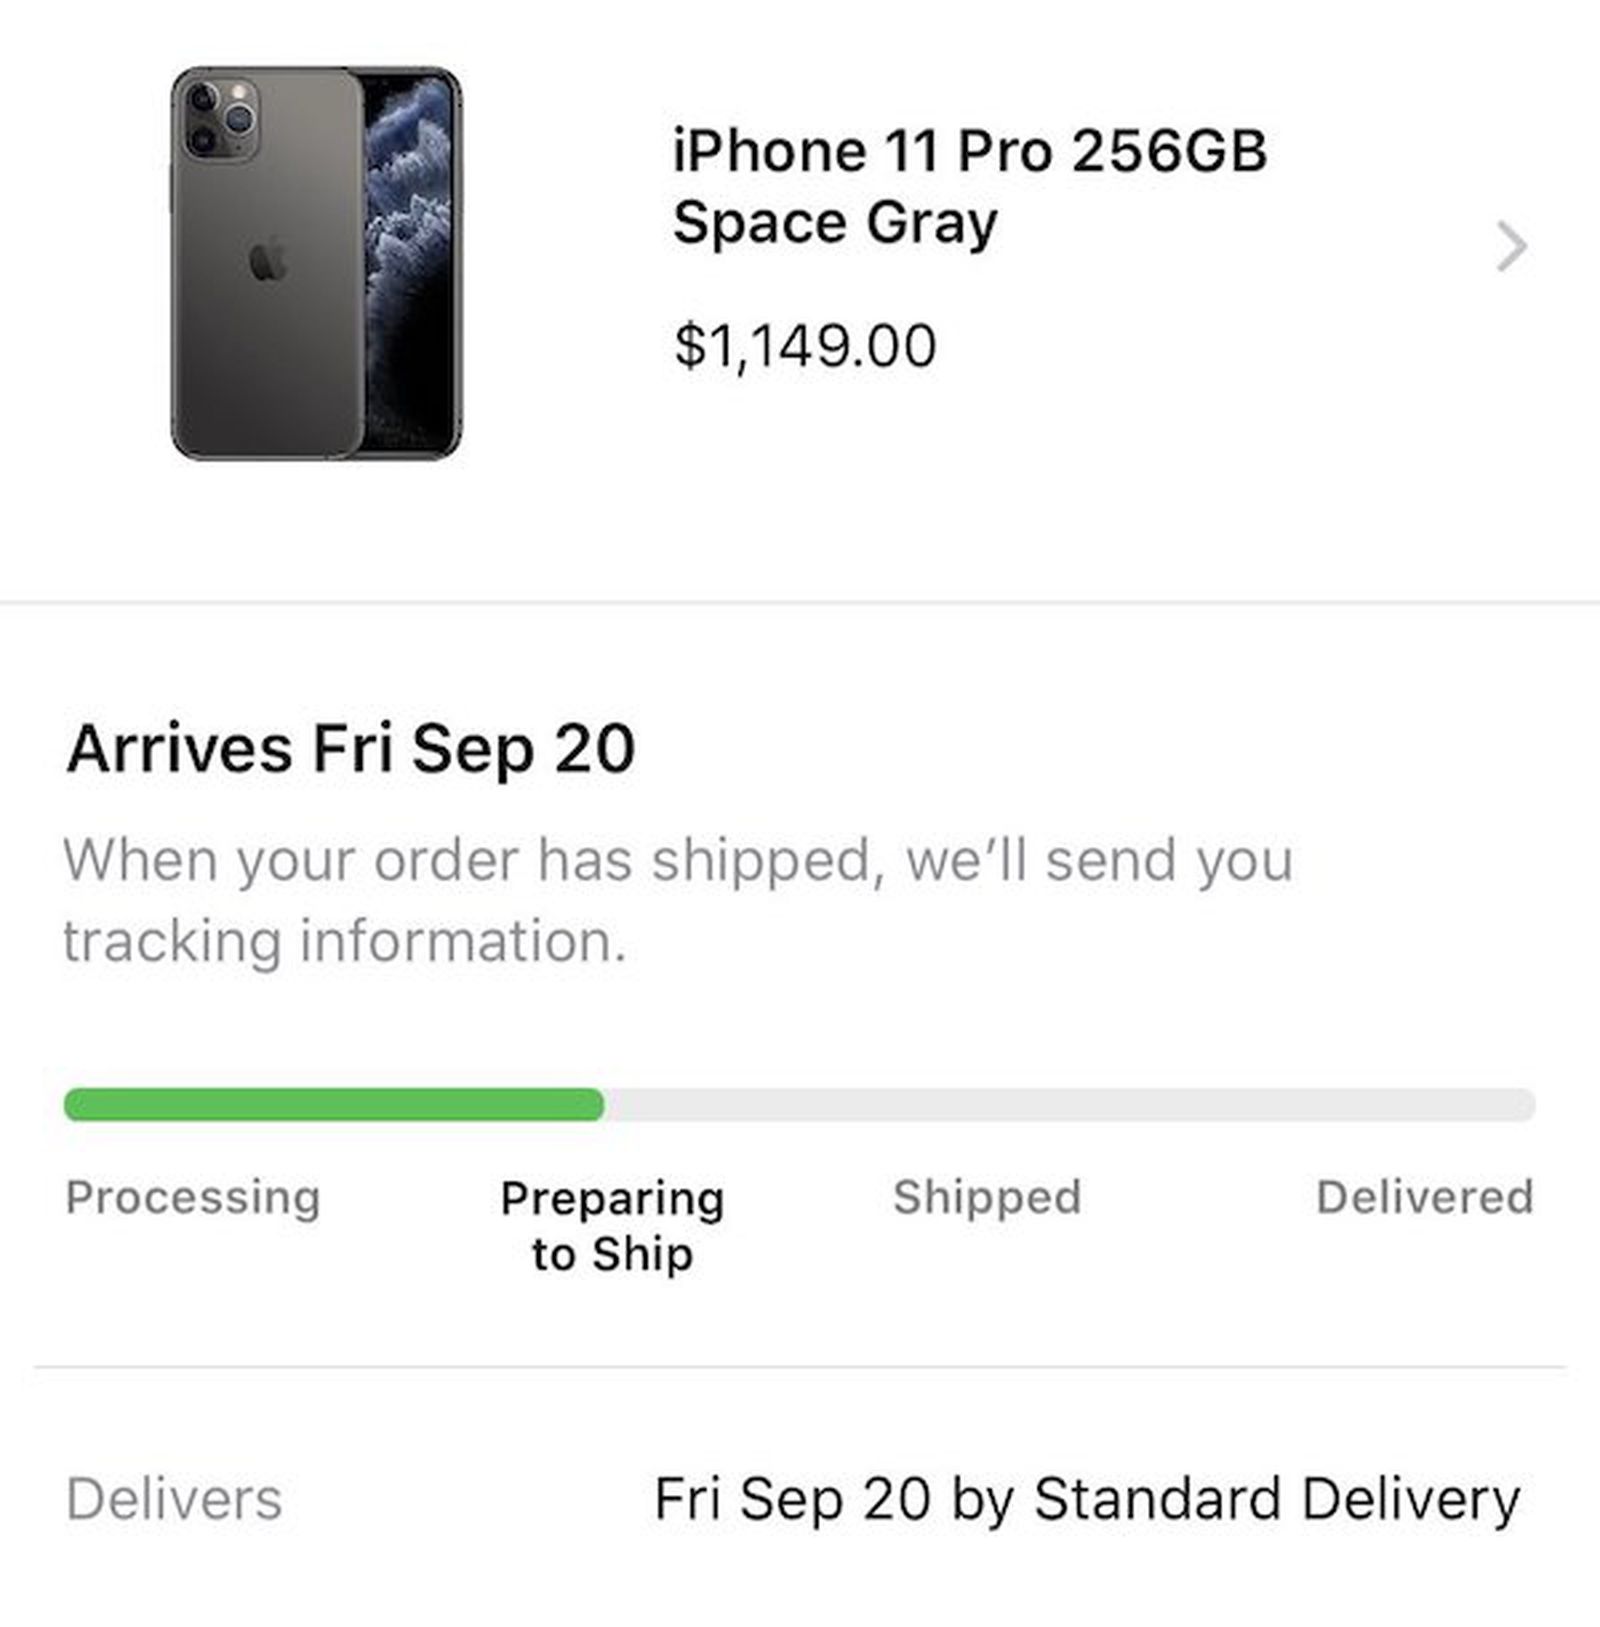 Here's how to preorder the iPhone 11 Pro and 11 Pro Max